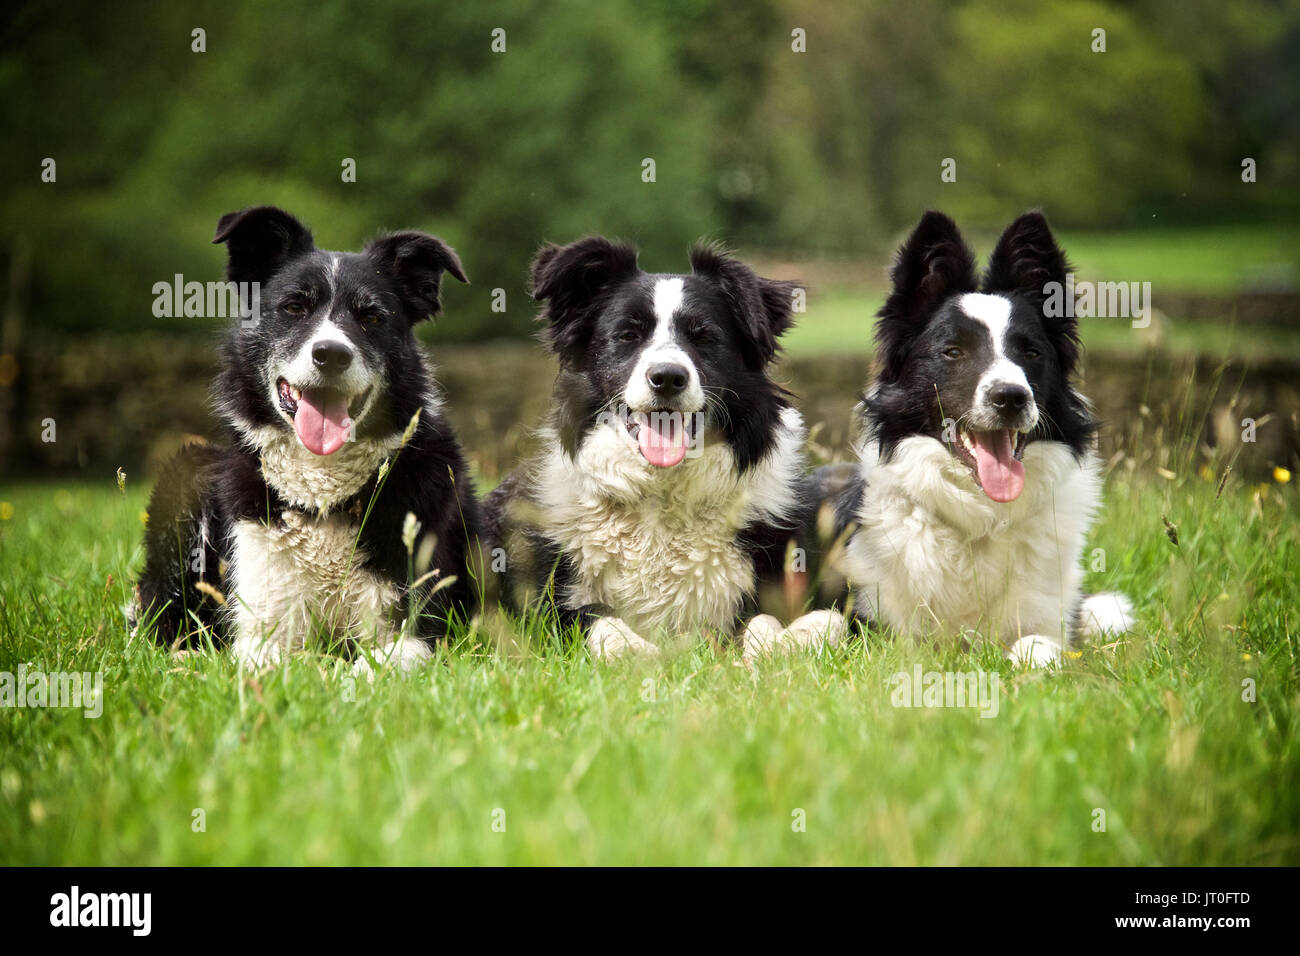 3 border collies sat together in a field Stock Photo